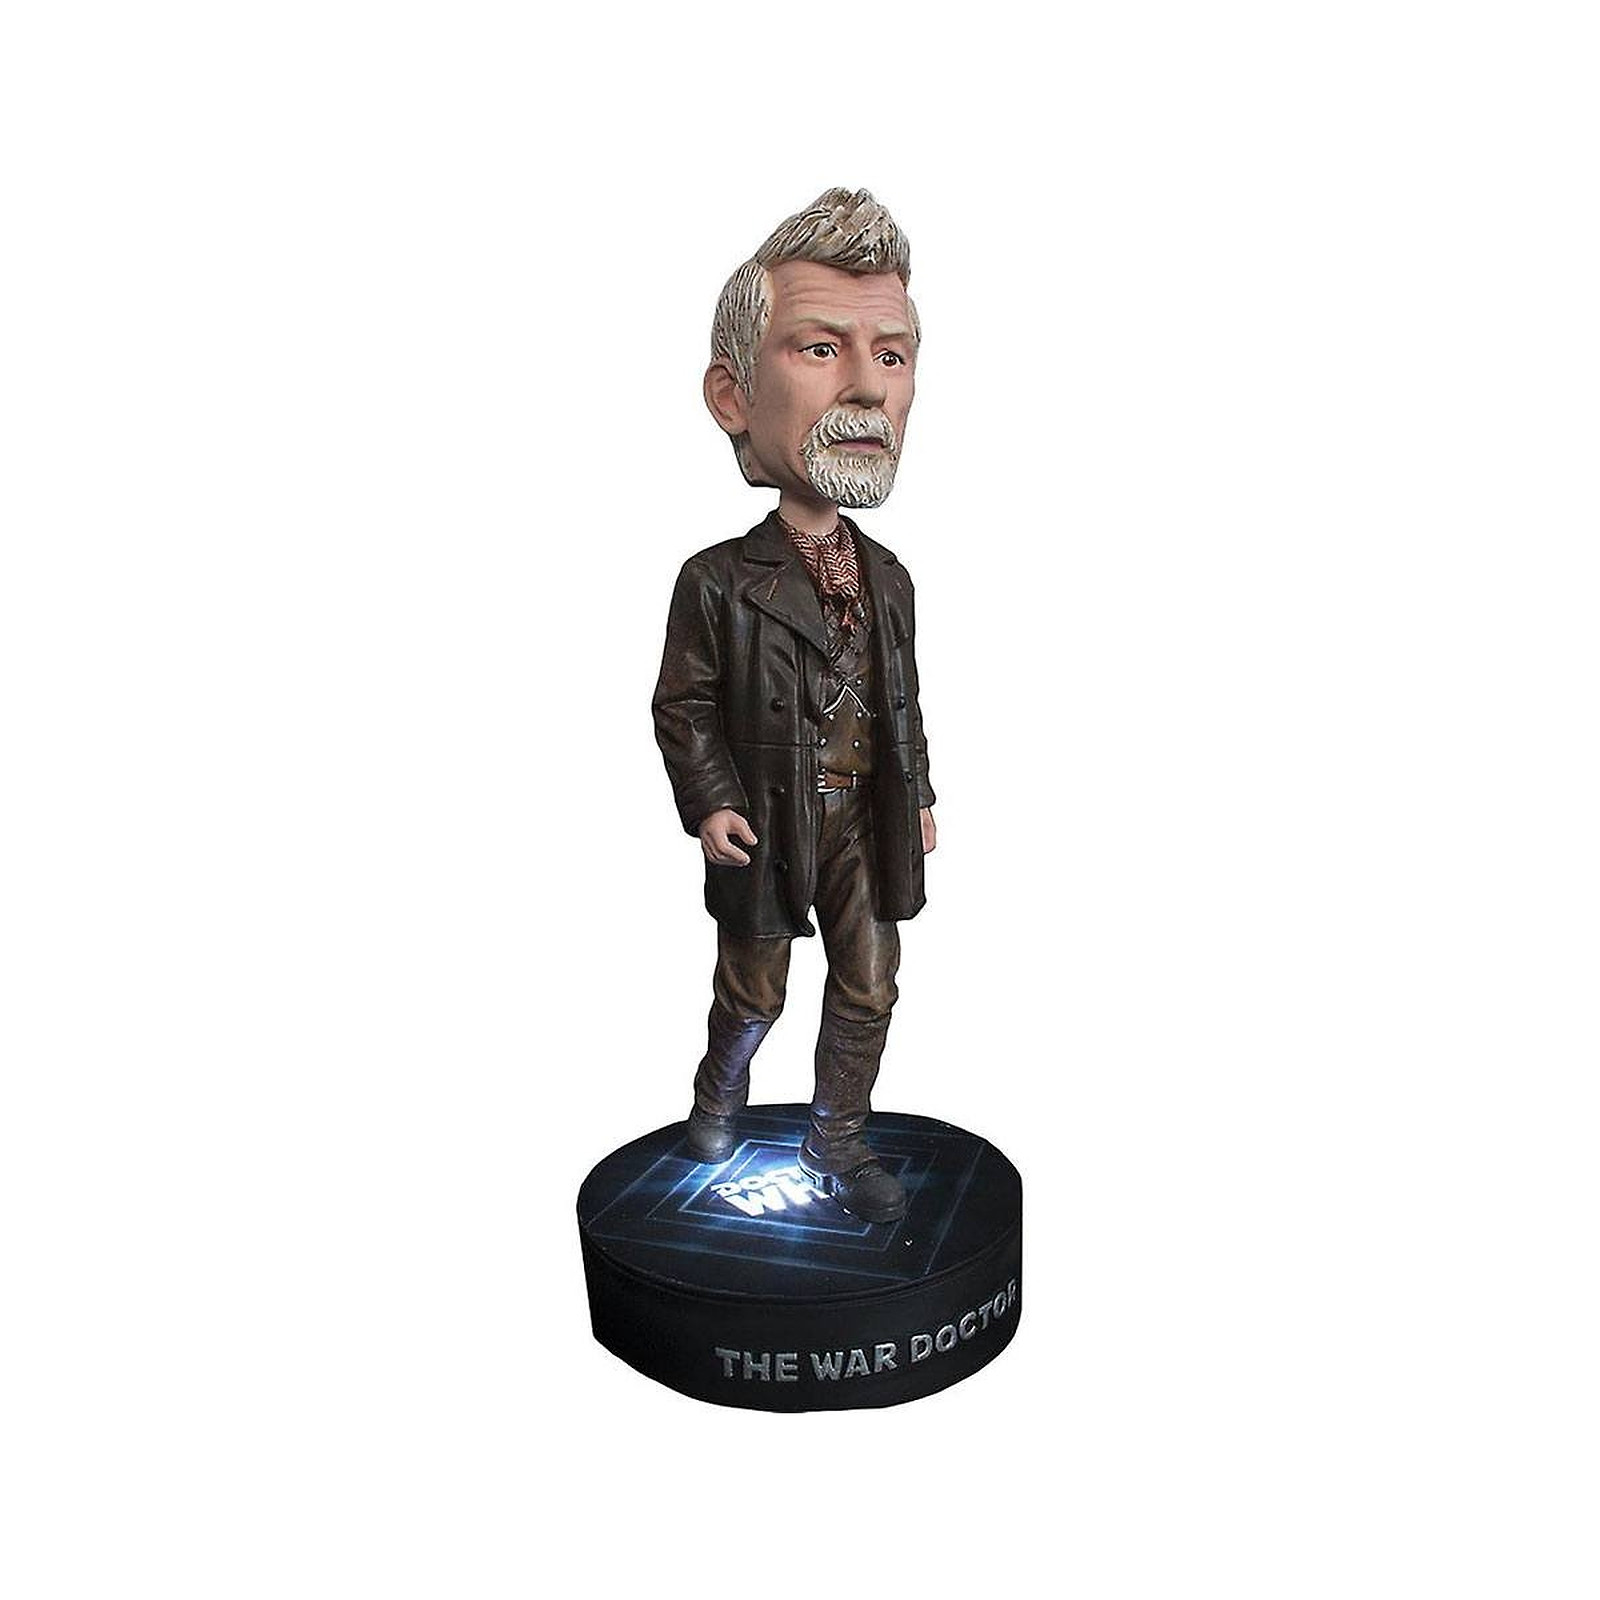 Doctor Who - Figurine Bobble Head The War Doctor 20 cm - Figurines Ikon Collectables